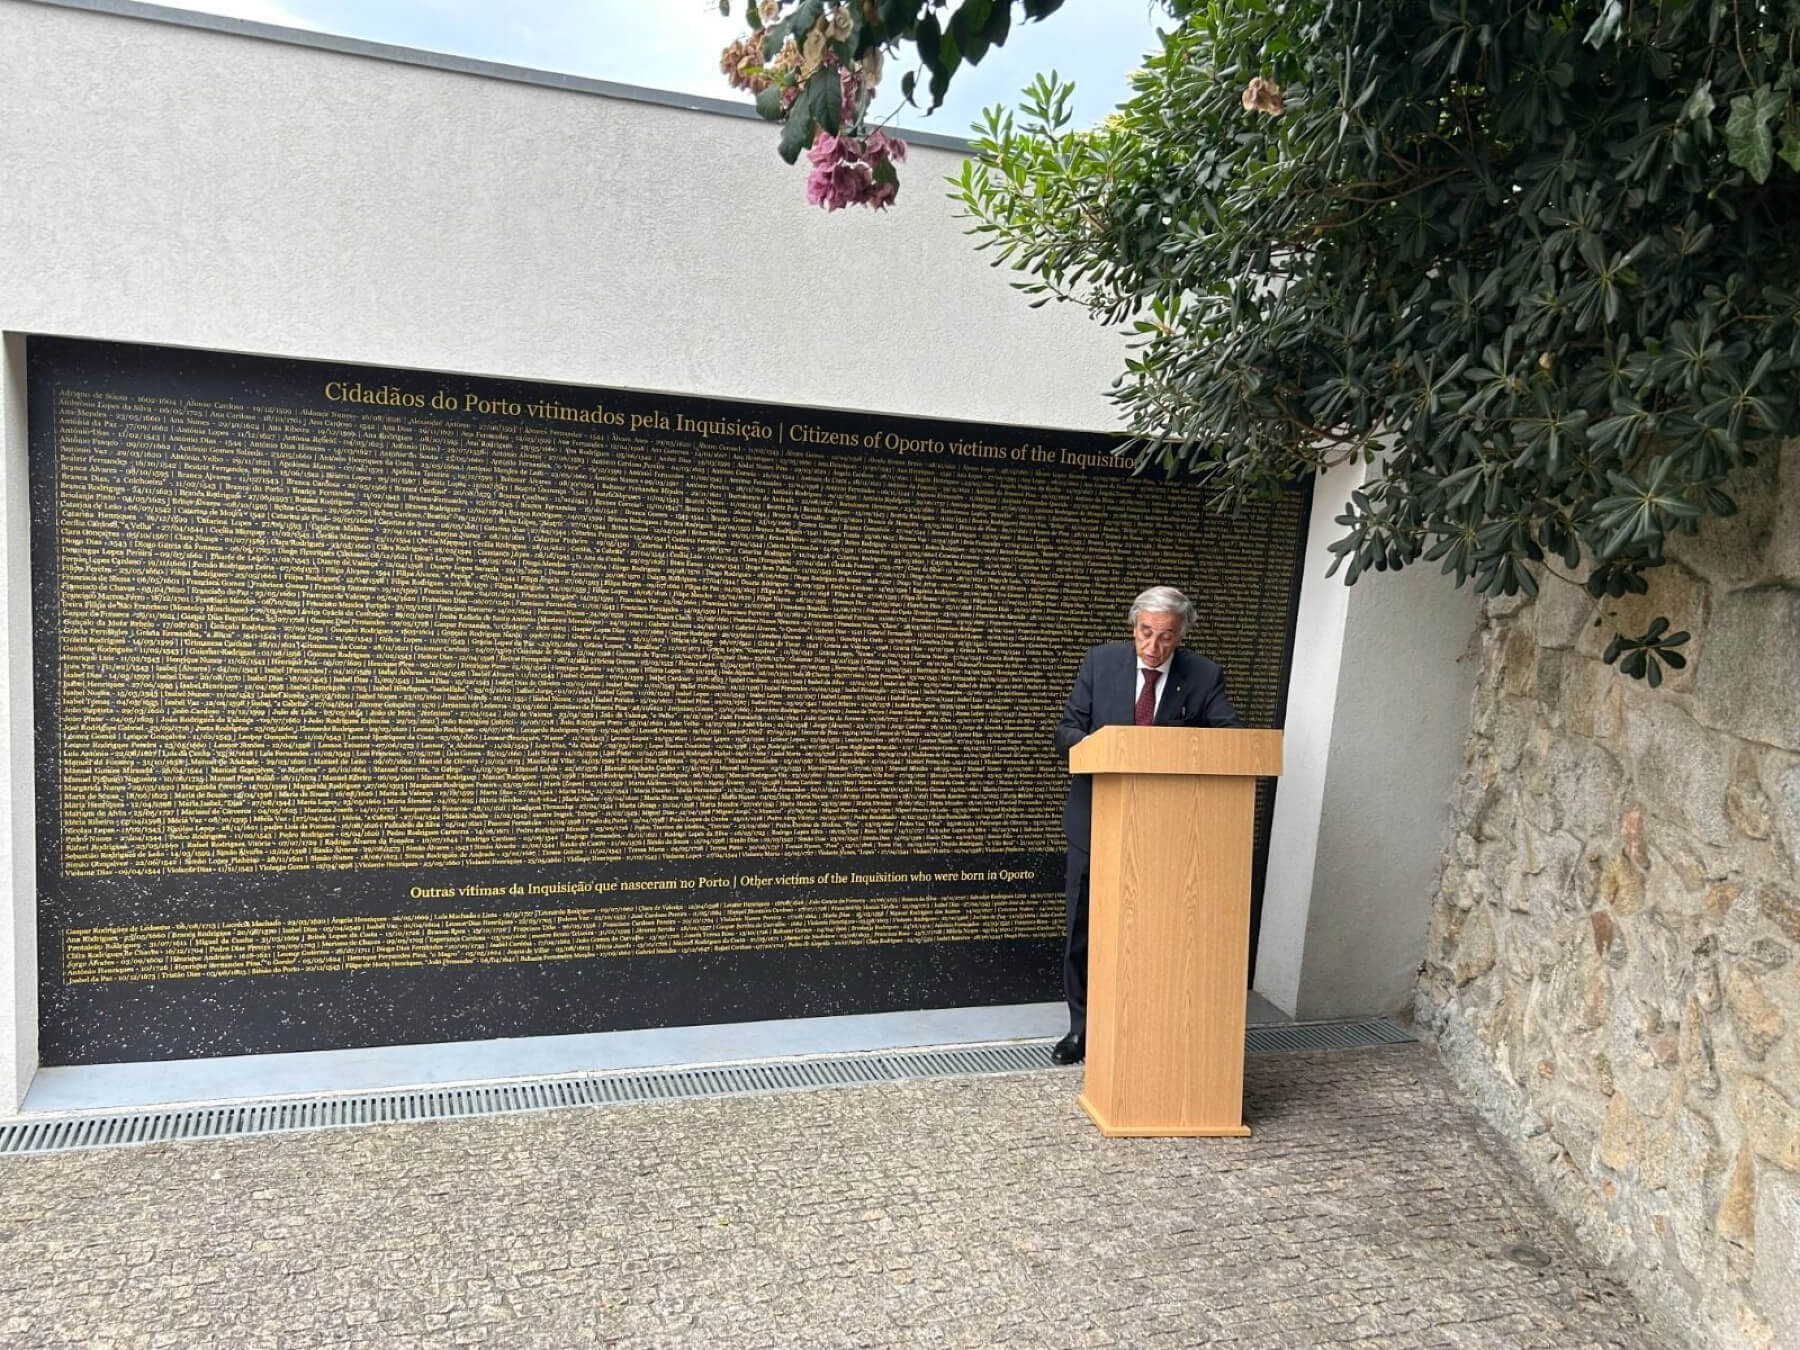 Sebastião Feio, president of the Porto municipal general assembly, speaks at a ceremony dedicating the Portuguese city's memorial to the local victims of the Inquisition, Sept. 3, 2023.